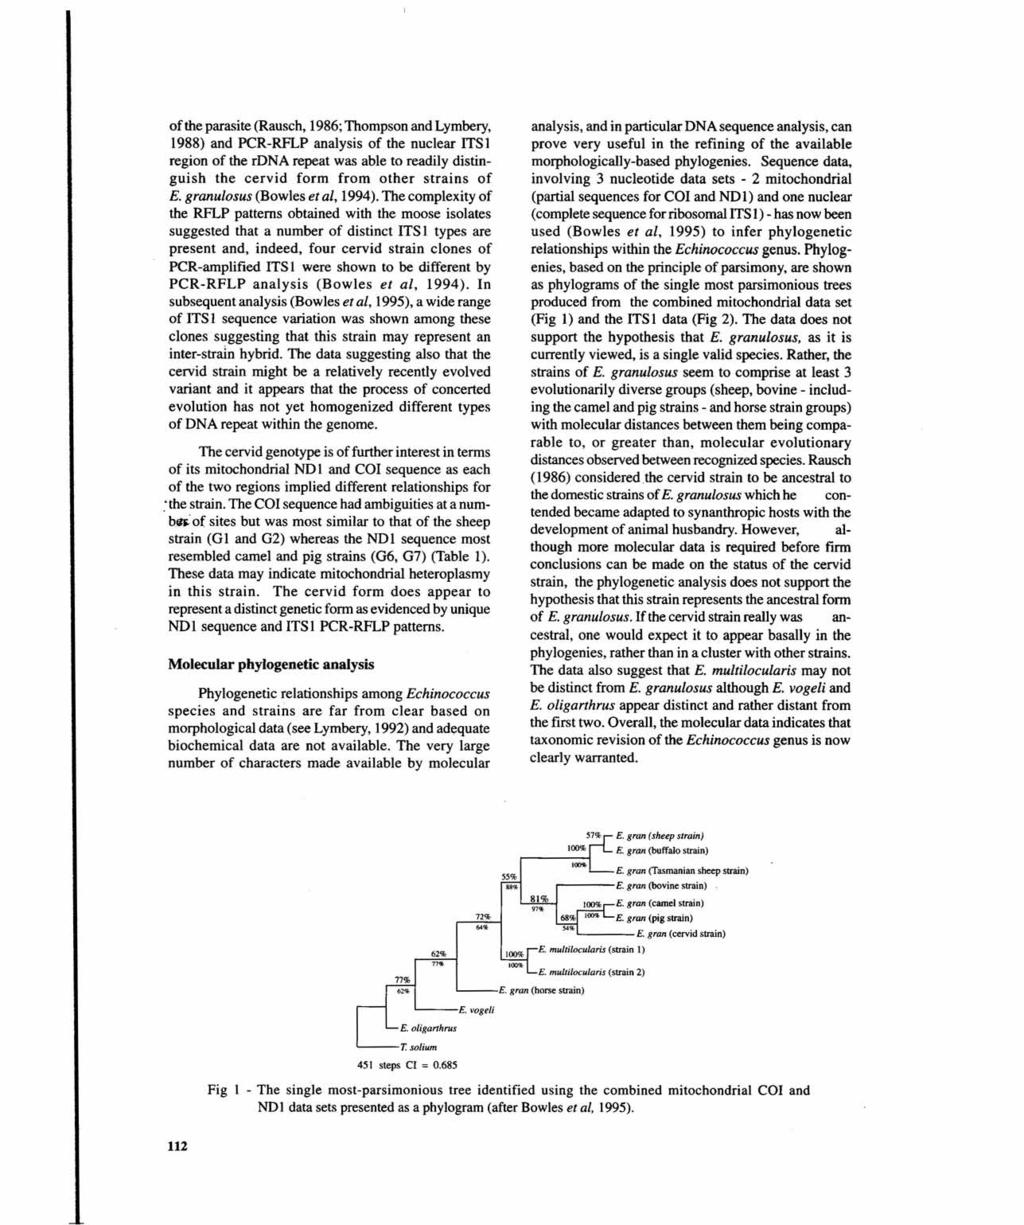 of the parasite (Rausch, 1986; Thompson and Lymbery, 1988) and PCR-RFLP analysis of the nuclear ITS1 region of the rdna repeat was able to readily distinguish the cervid form from other strains of E.